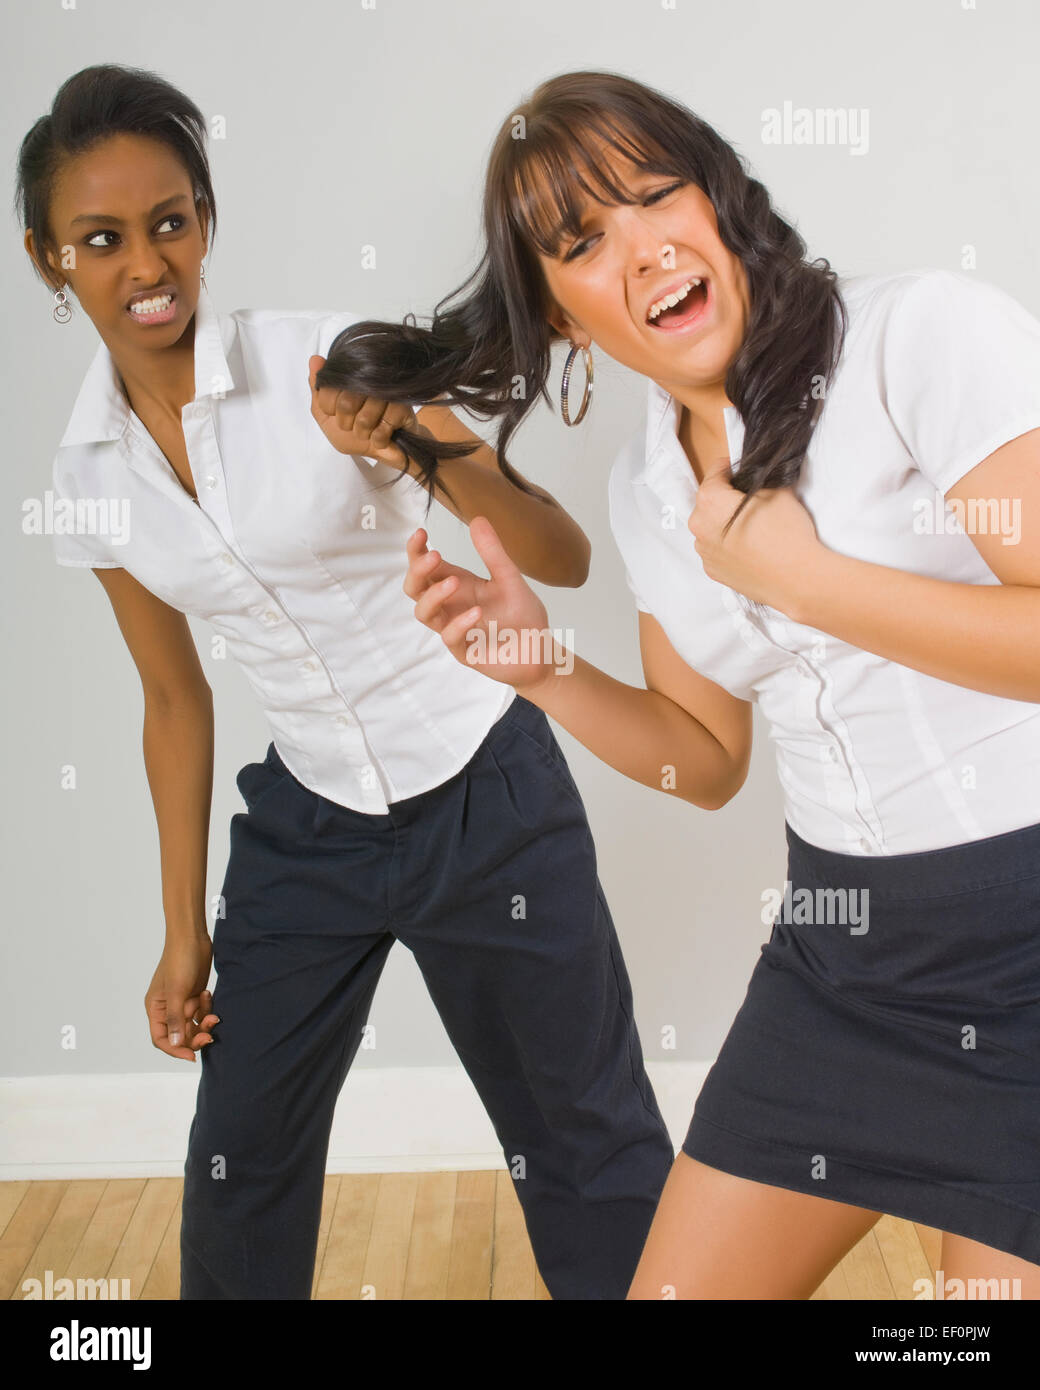 Girl pulling another girl's hair Stock Photo